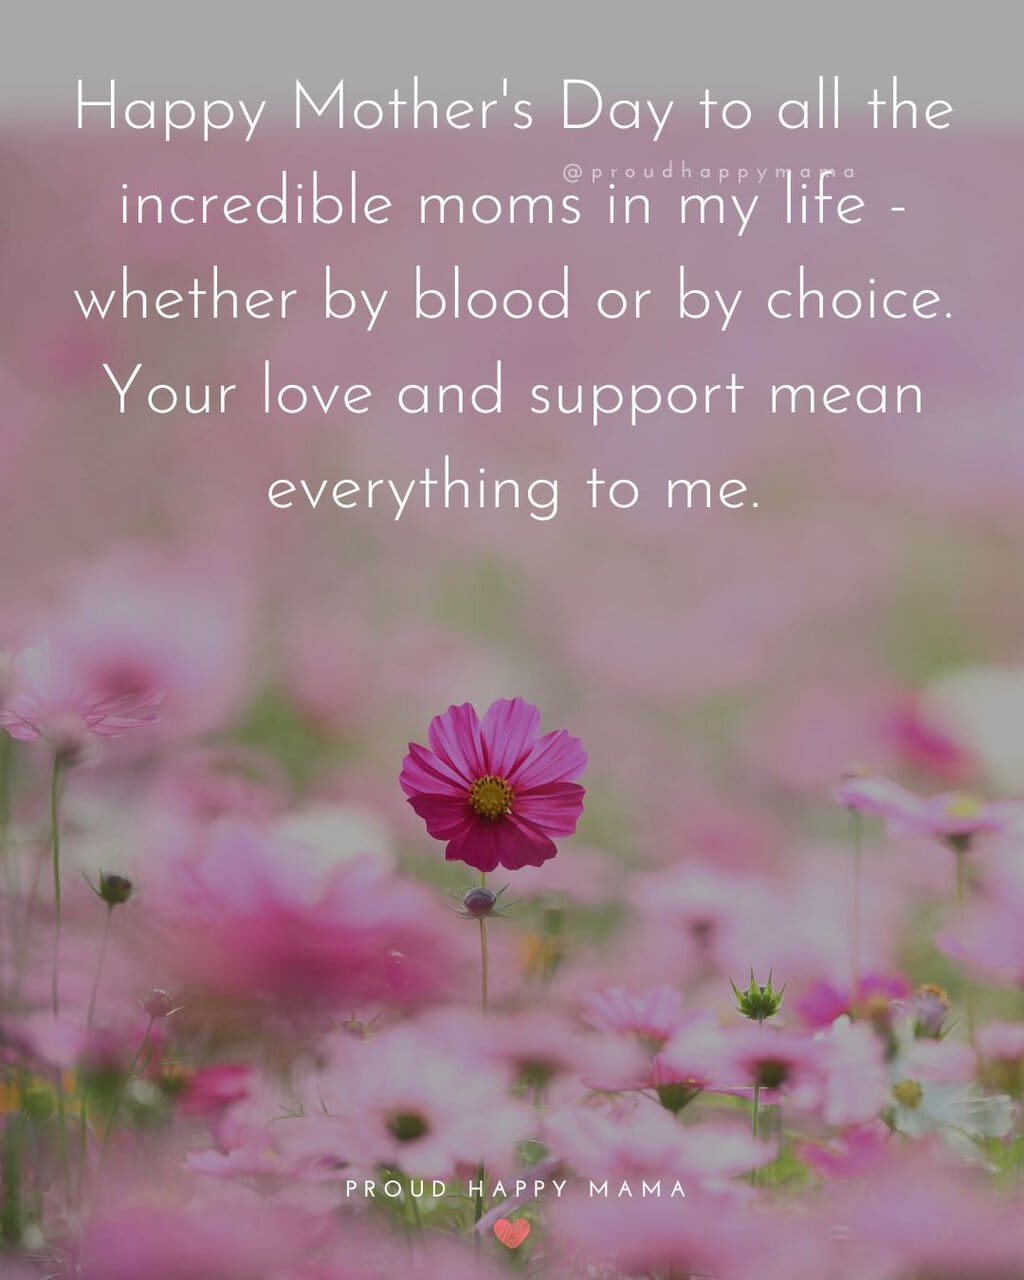 Mother's day quotes for friends and family